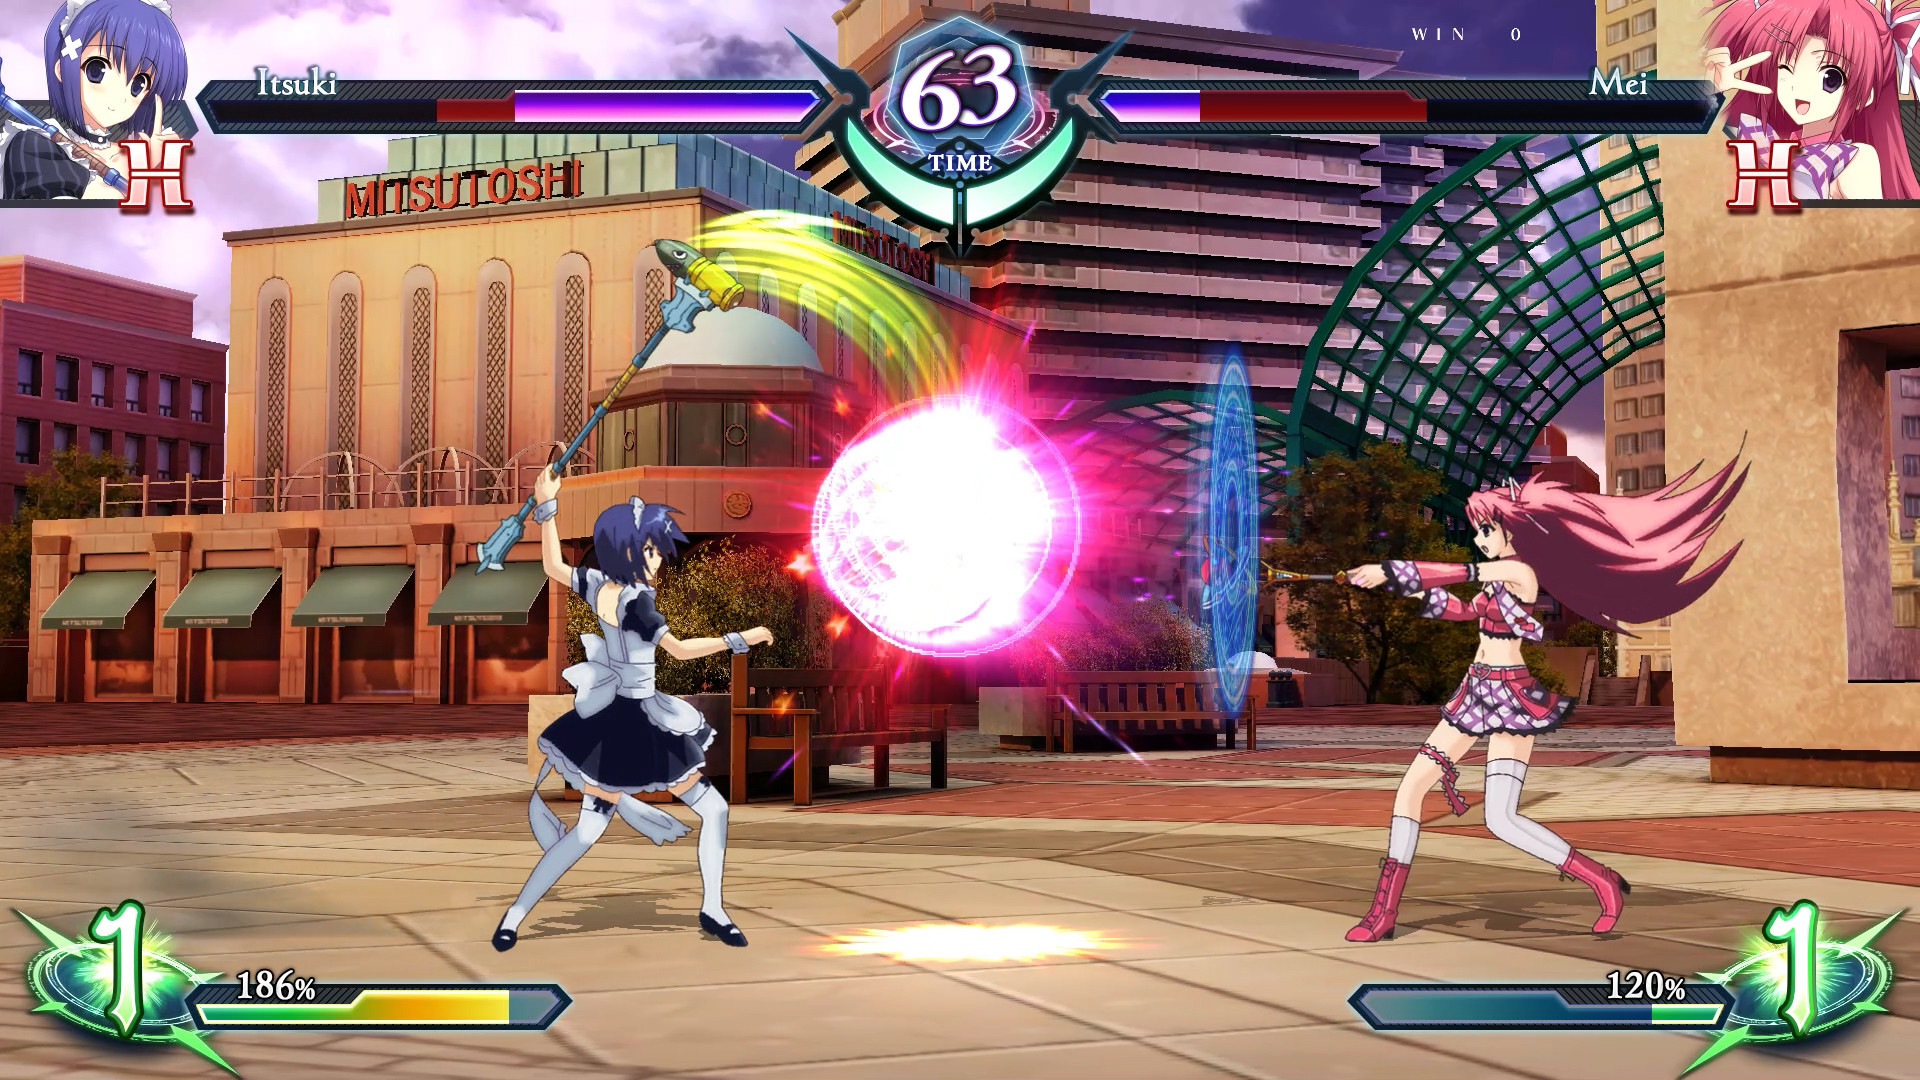 BlazBlue Centralfiction: The best anime fighter game? - MMO Haven - MMO  News & Reviews